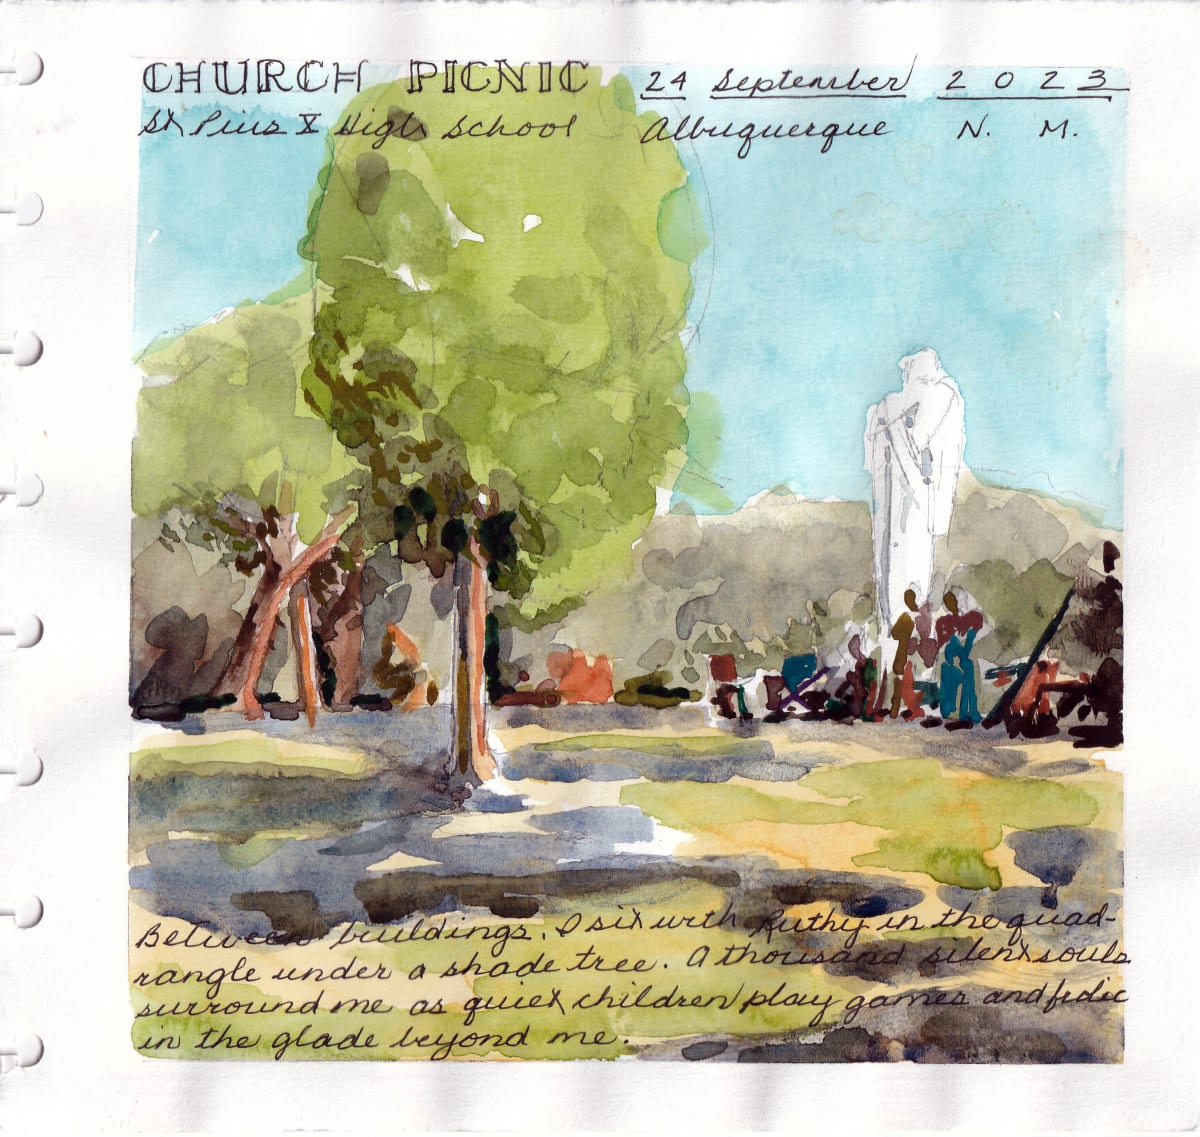 Journey Daybook Page by Margaret Pulis Herrick (Peggy)  Image: St Joseph on the Rio Grande church picnic